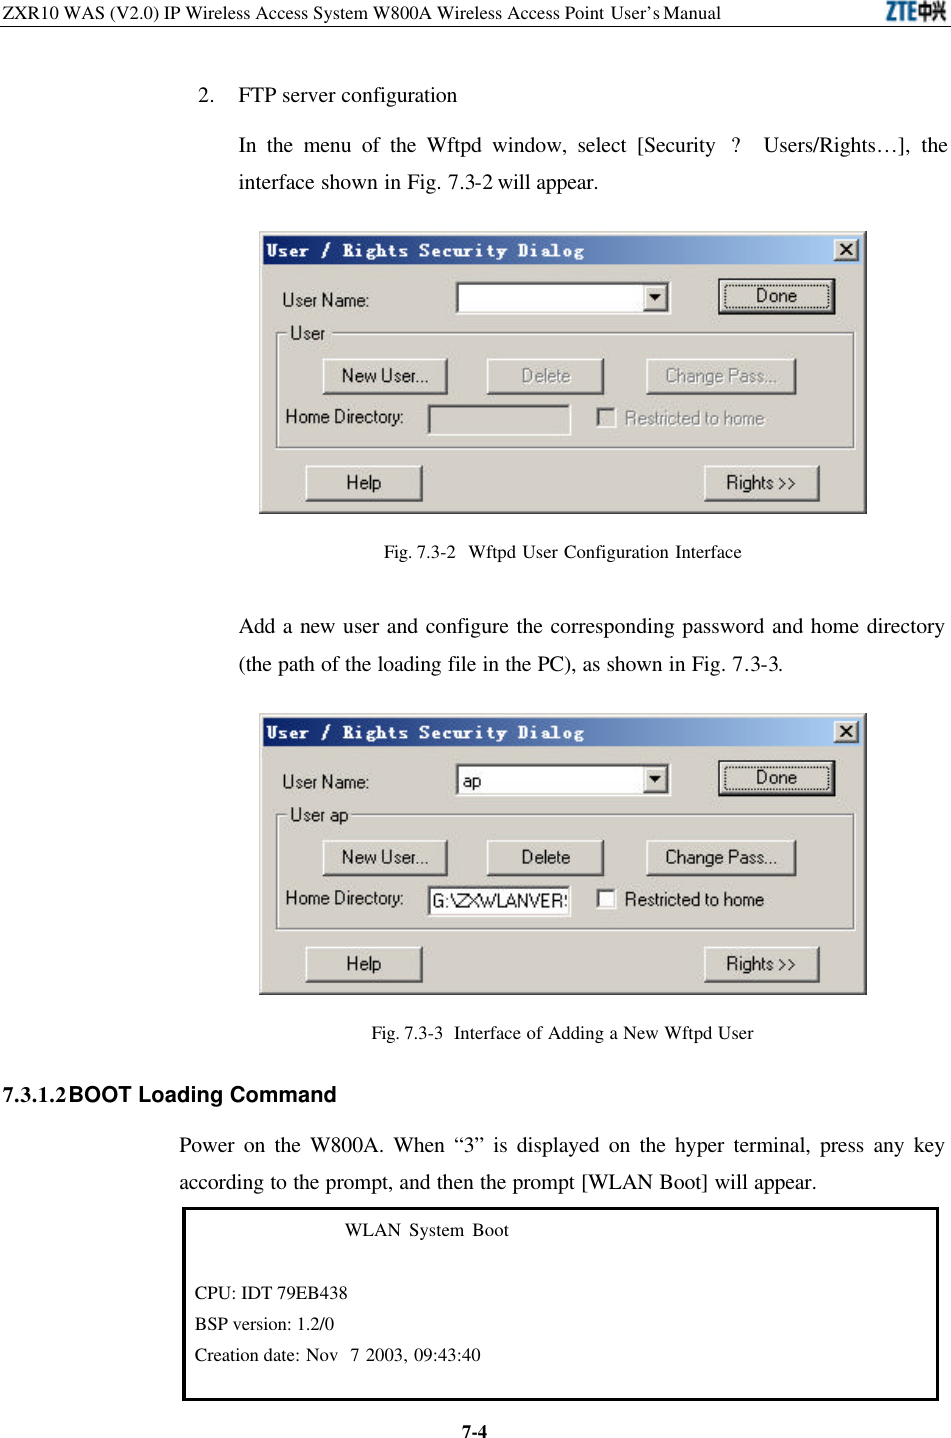 ZXR10 WAS (V2.0) IP Wireless Access System W800A Wireless Access Point User’s Manual  7-42. FTP server configuration   In the menu of the Wftpd window, select [Security  ? Users/Rights…], the interface shown in Fig. 7.3-2 will appear.    Fig. 7.3-2  Wftpd User Configuration Interface Add a new user and configure the corresponding password and home directory (the path of the loading file in the PC), as shown in Fig. 7.3-3.    Fig. 7.3-3  Interface of Adding a New Wftpd User   7.3.1.2 BOOT Loading Command   Power on the W800A. When “3” is displayed on the hyper terminal, press any key according to the prompt, and then the prompt [WLAN Boot] will appear.                      WLAN System Boot  CPU: IDT 79EB438 BSP version: 1.2/0 Creation date: Nov  7 2003, 09:43:40      